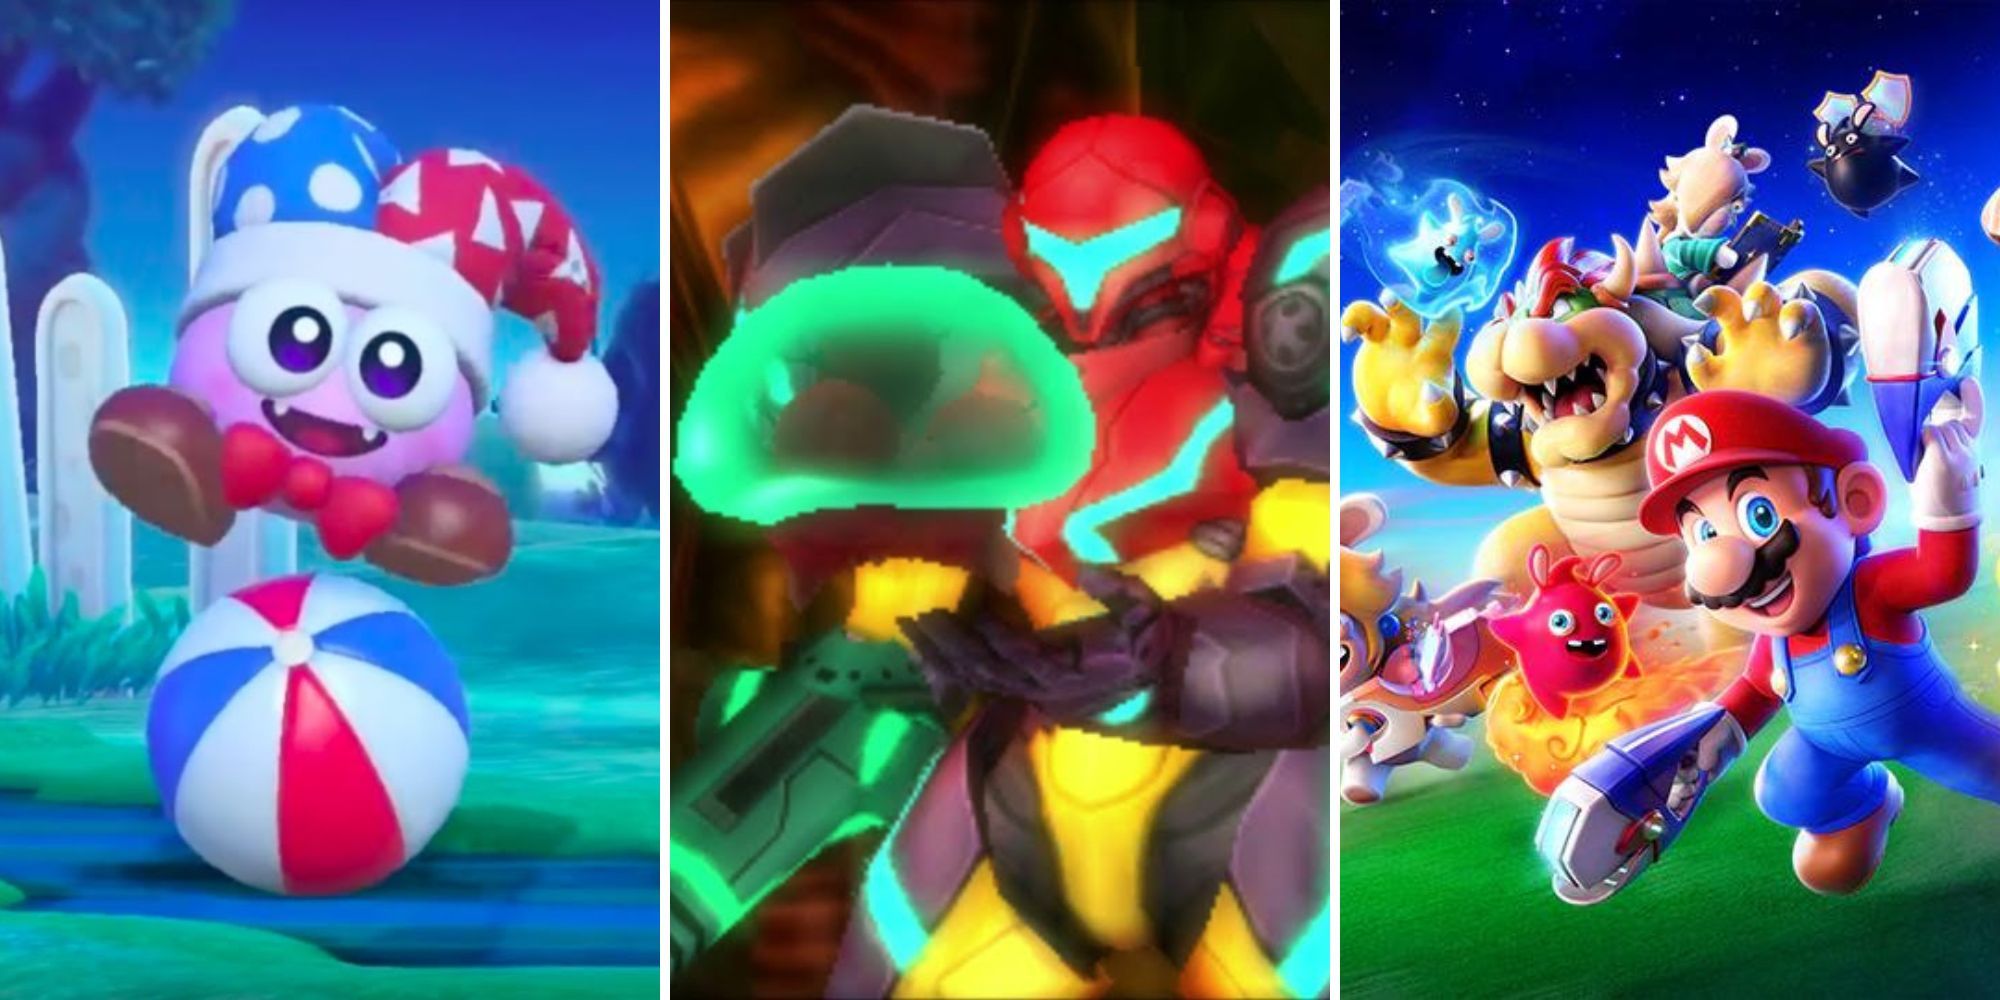 Marx balances on a ball, Samus holds a baby Metroid, Mario and Bowser run together surrounded by Sparks 